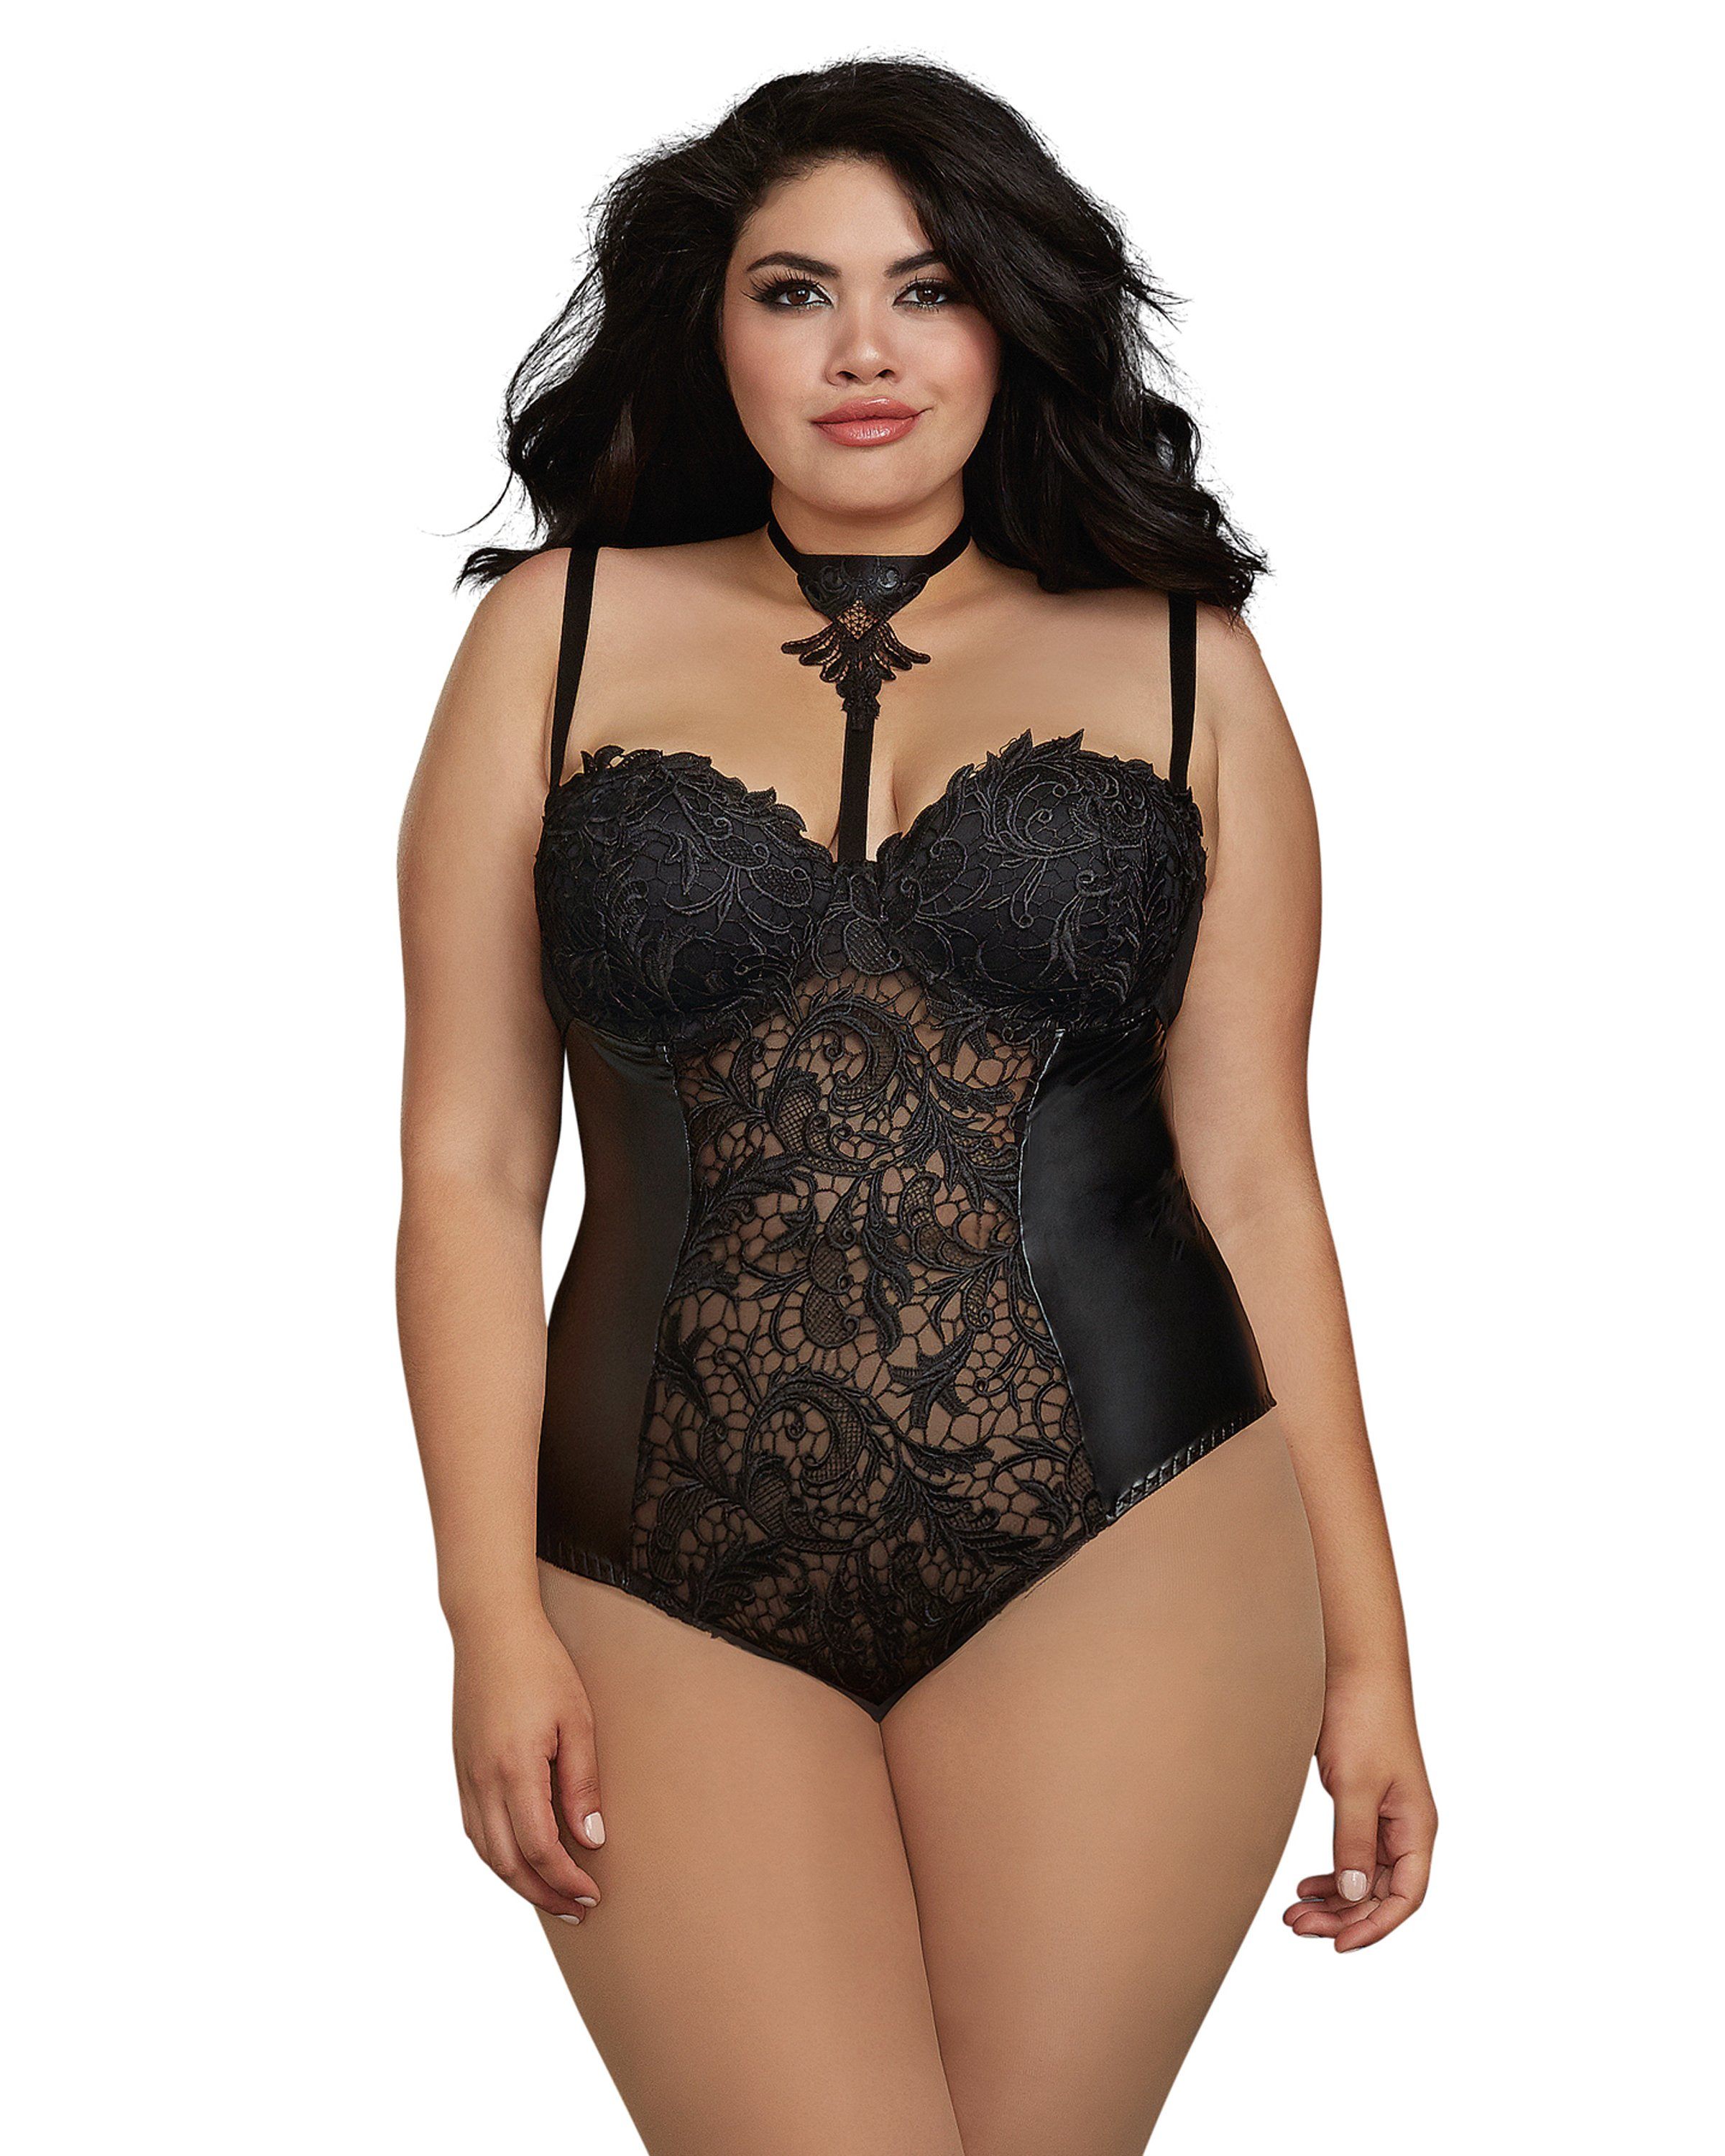 Plus Size Venice Lace and Faux Leather Collared Teddy Teddy Dreamgirl International 